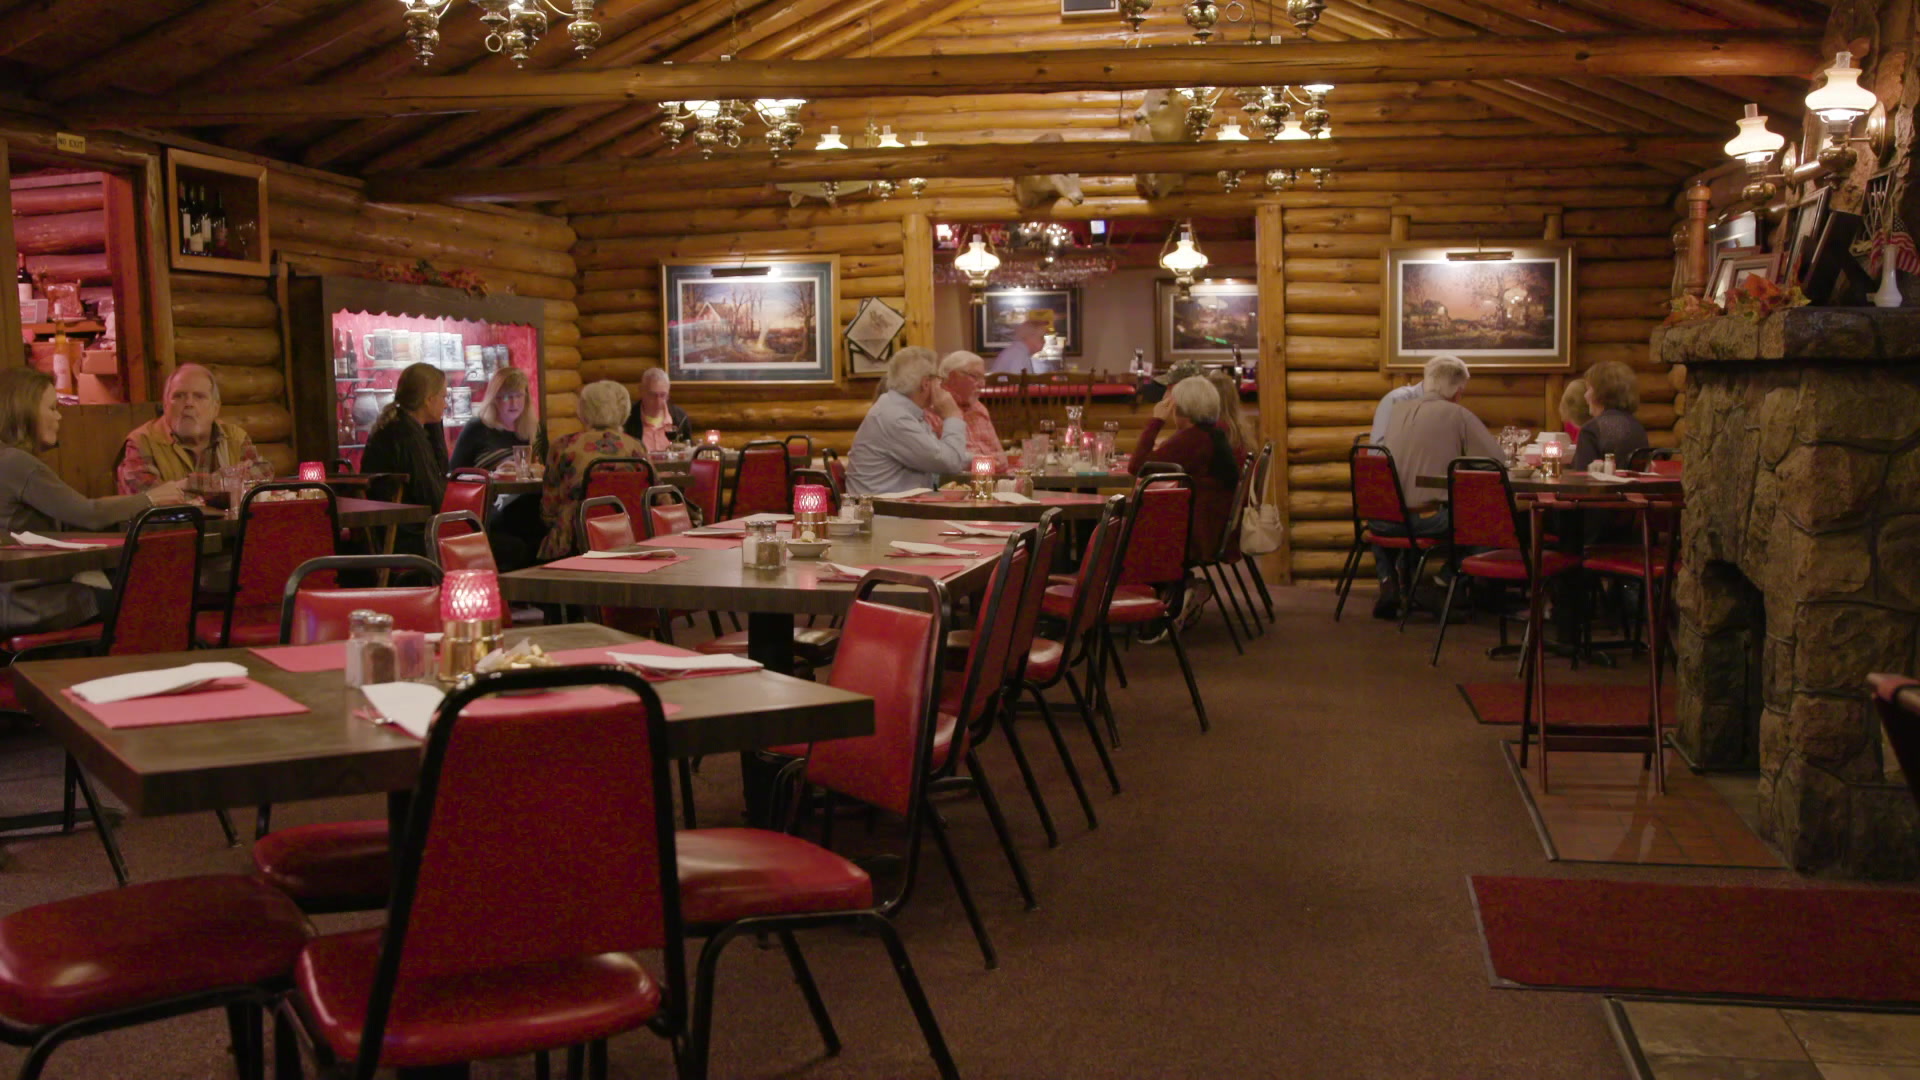 Dinners sit on red chairs and at tables inside a dining room with log walls and a stone fireplace at right.